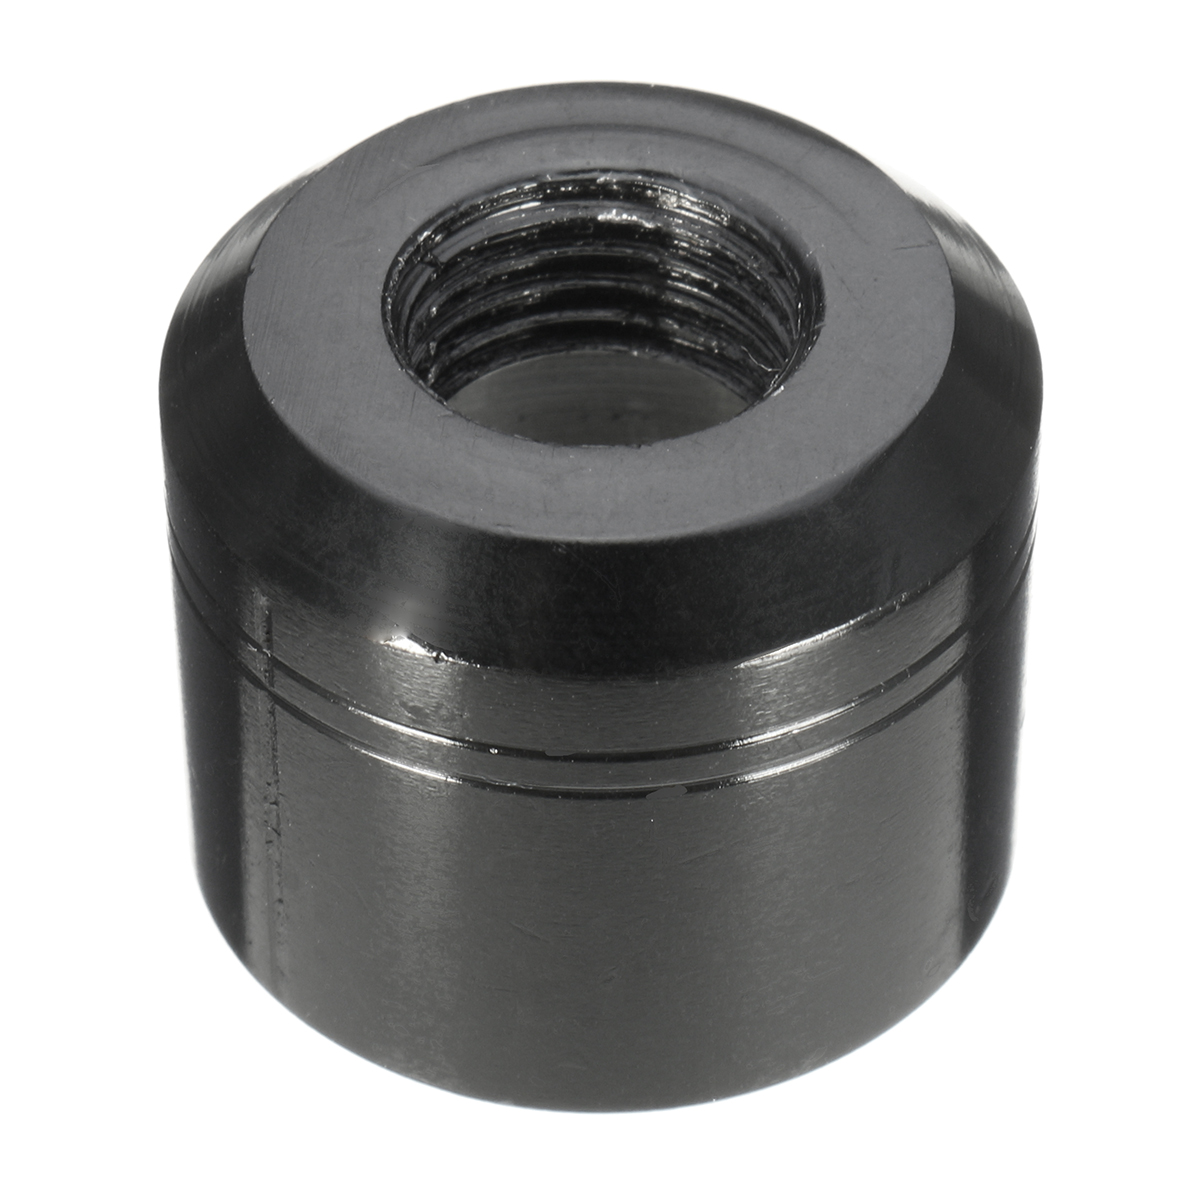 Black-Lift-Up-Reverse-Lockout-Shifter-Shift-Knob-Adapter-For-Manual-Shifters-1383781